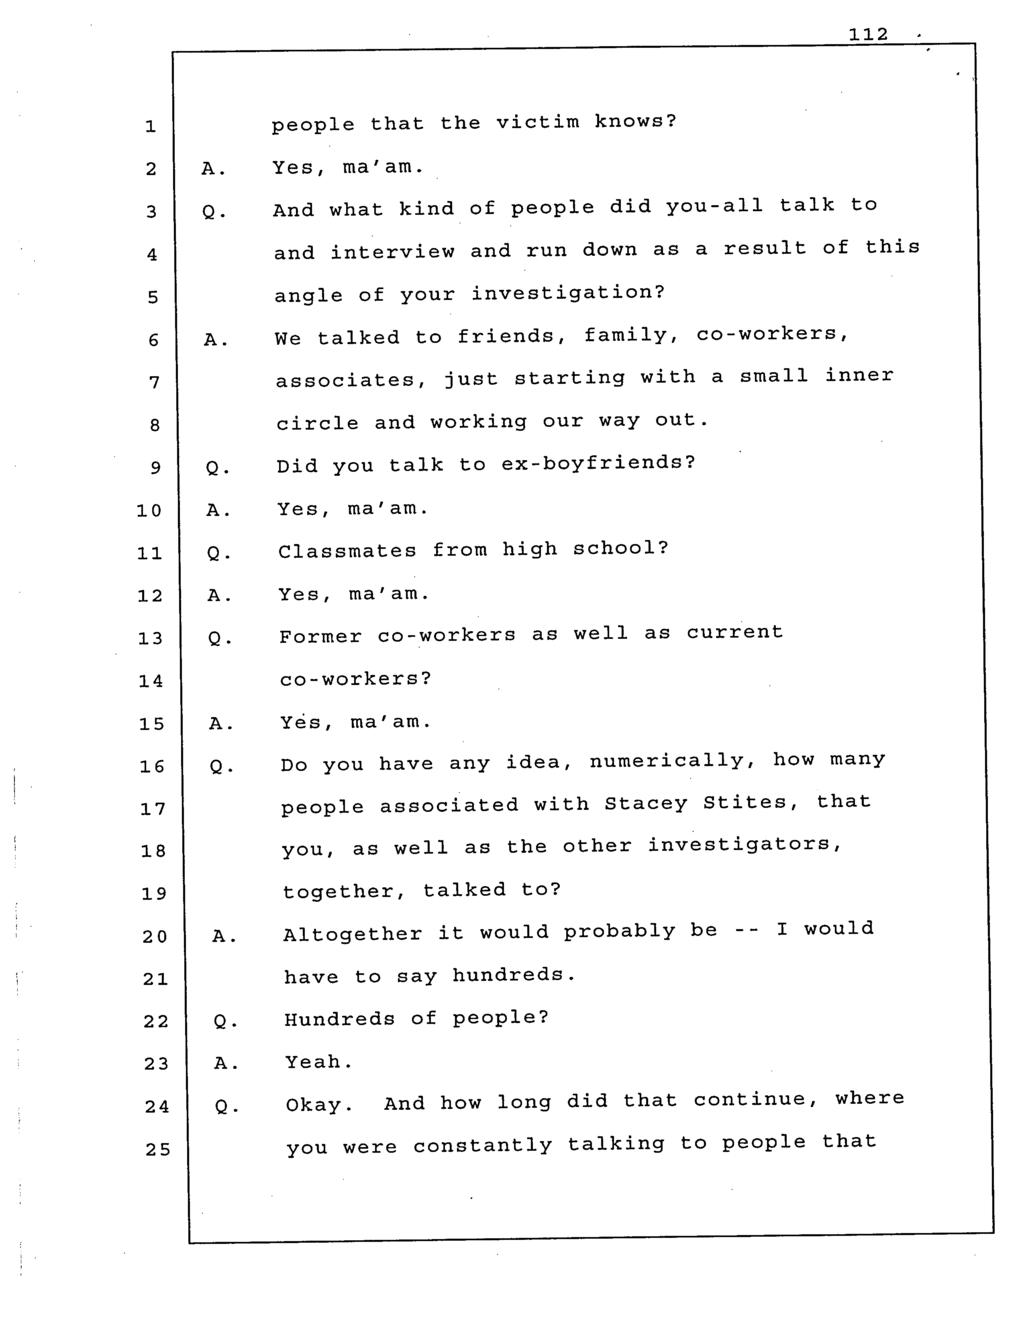 people that the victim knows? And what kind of people did you-all talk to and interview and run down as a result of this angle of your investigation?